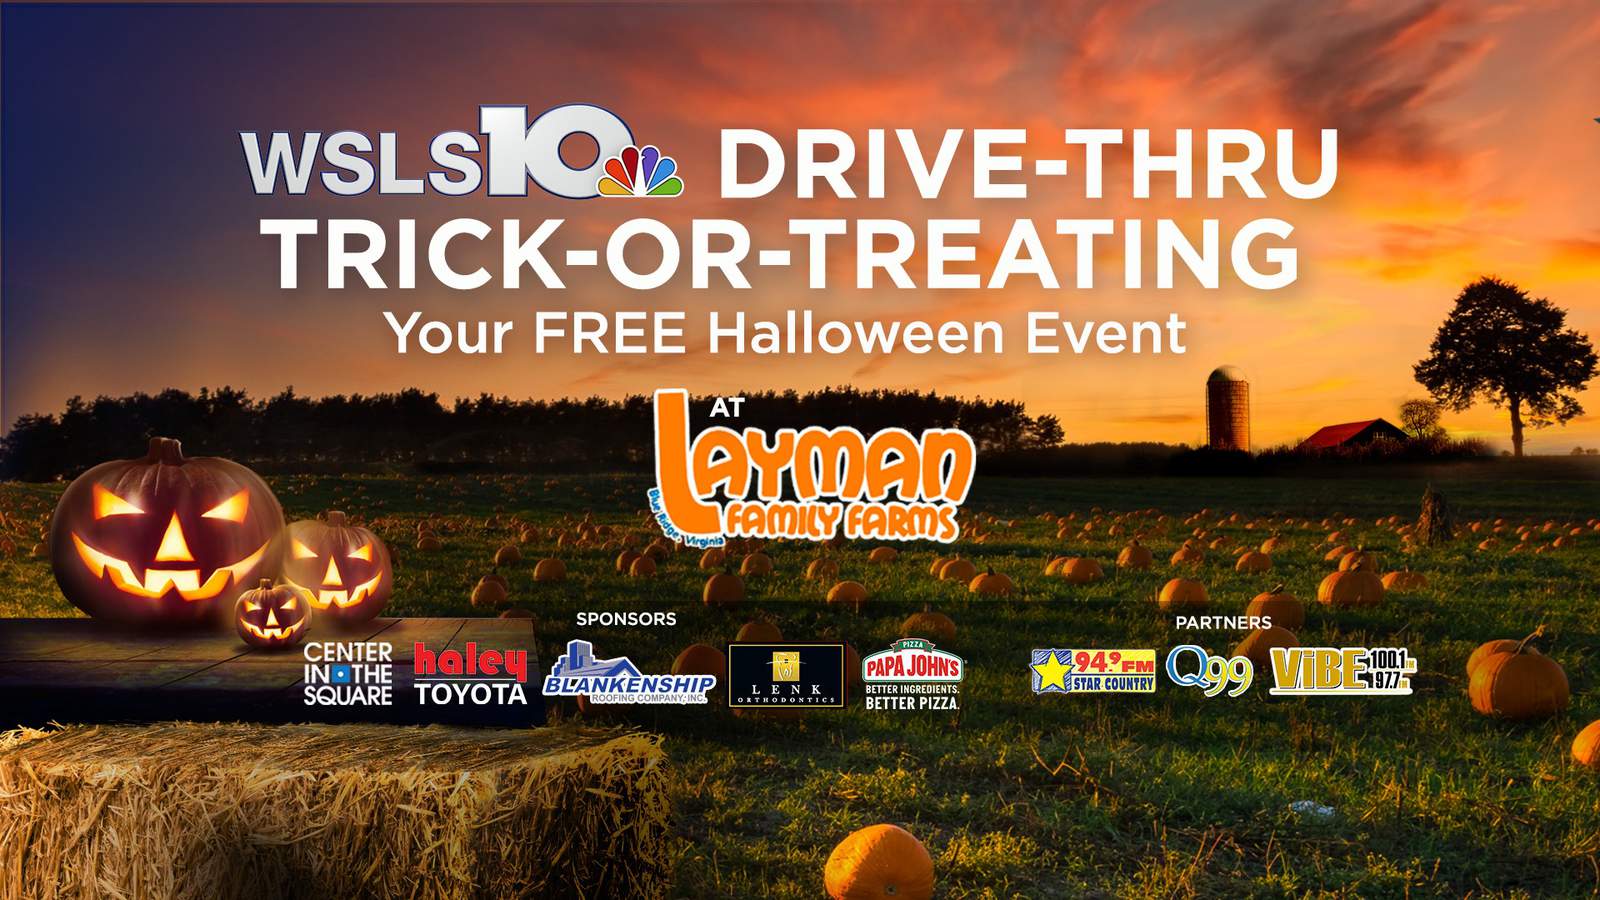 WSLS 10 holding a free, socially-distant, drive-thru trick-or-treating event